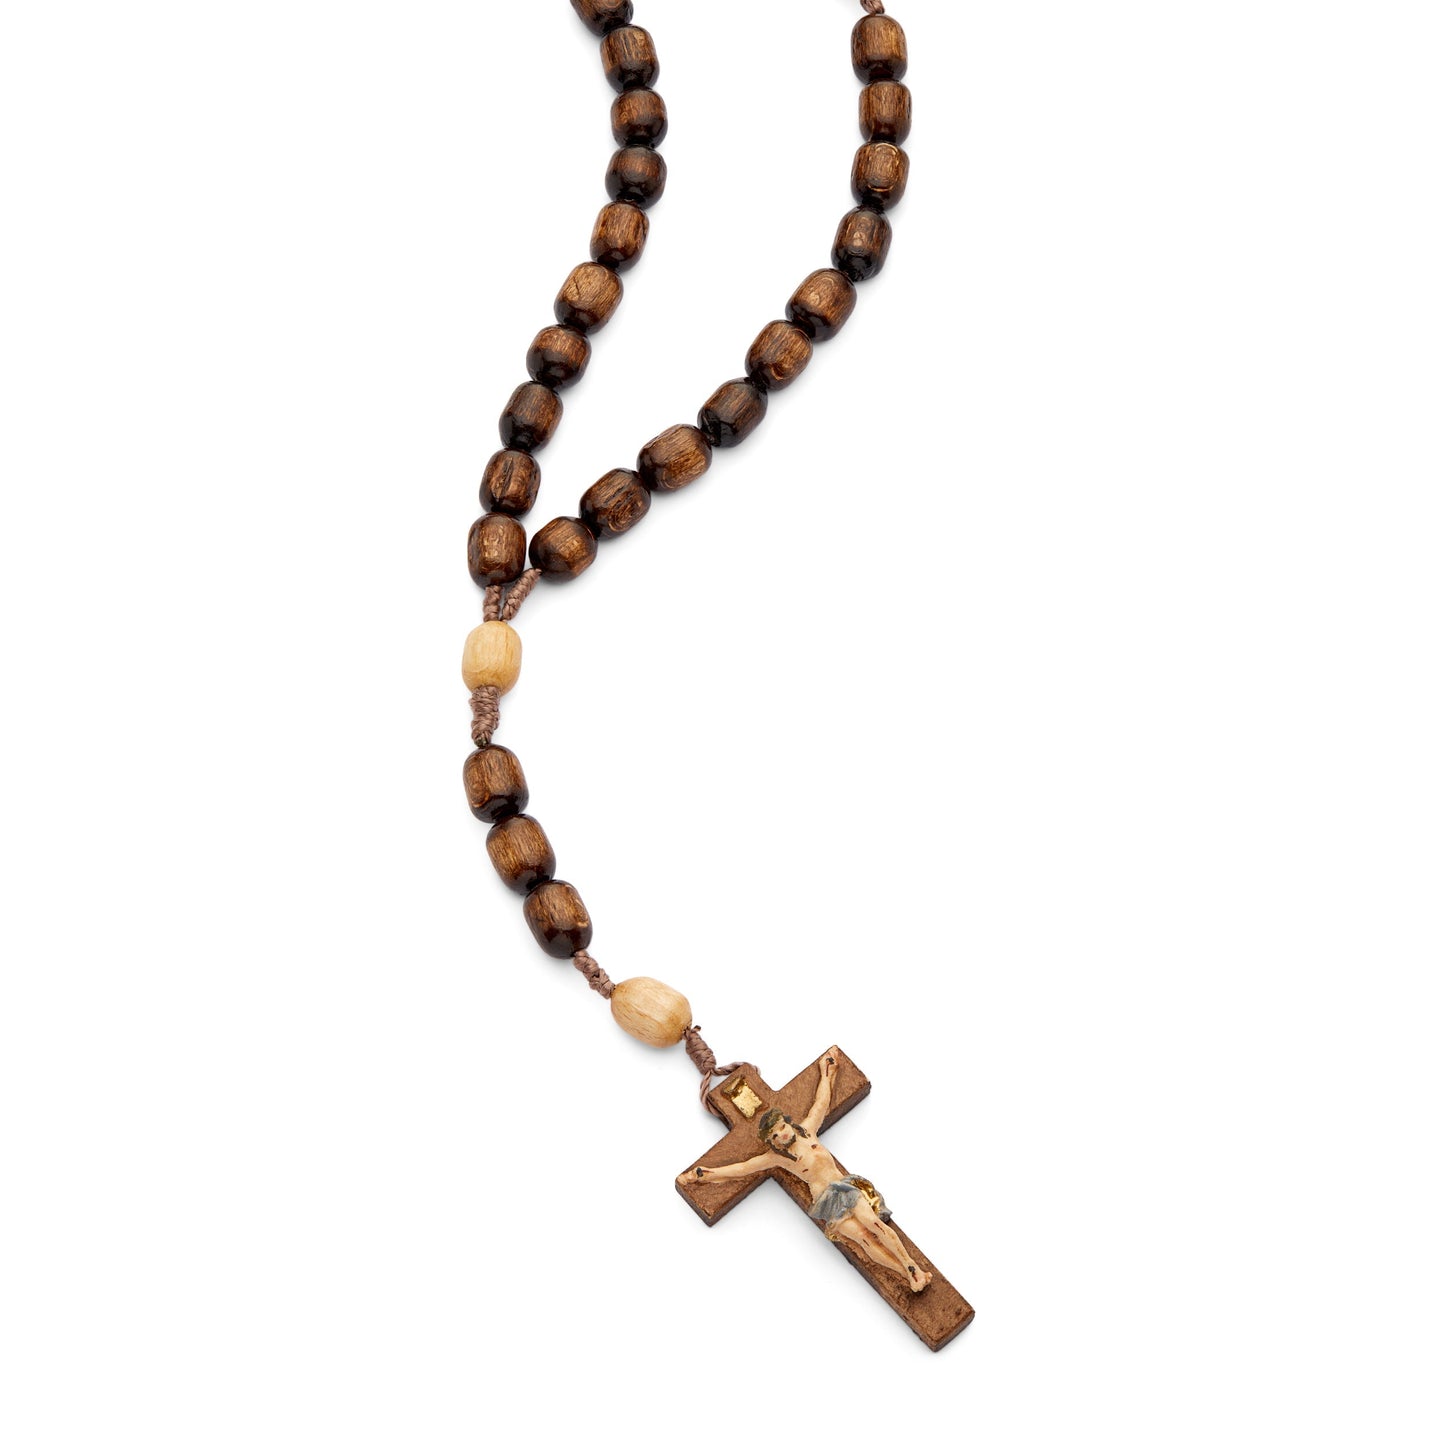 MONDO CATTOLICO Prayer Beads 51 cm (20.07 in) / 10 mm (0.39 in) Wooden Rosary with Handpainted Crucifix